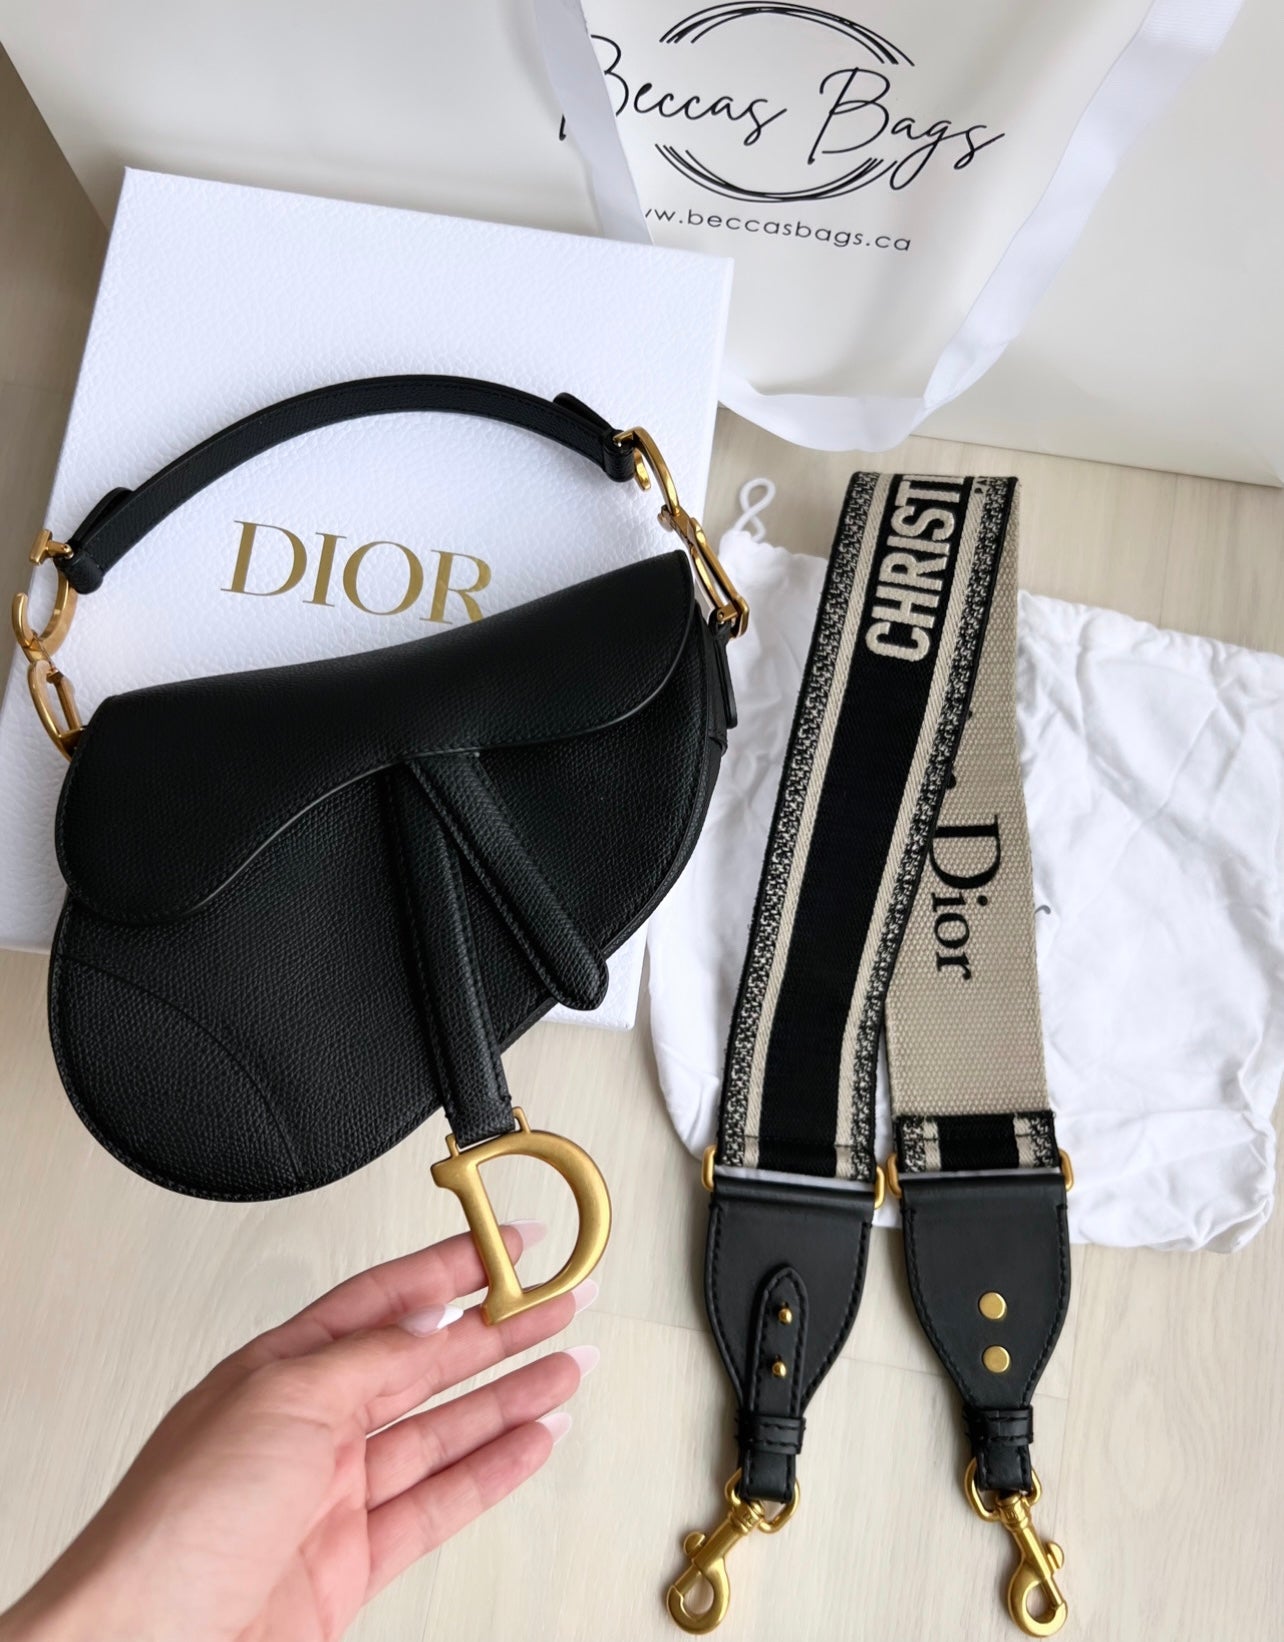 Dior has brought back its iconic Saddle bag